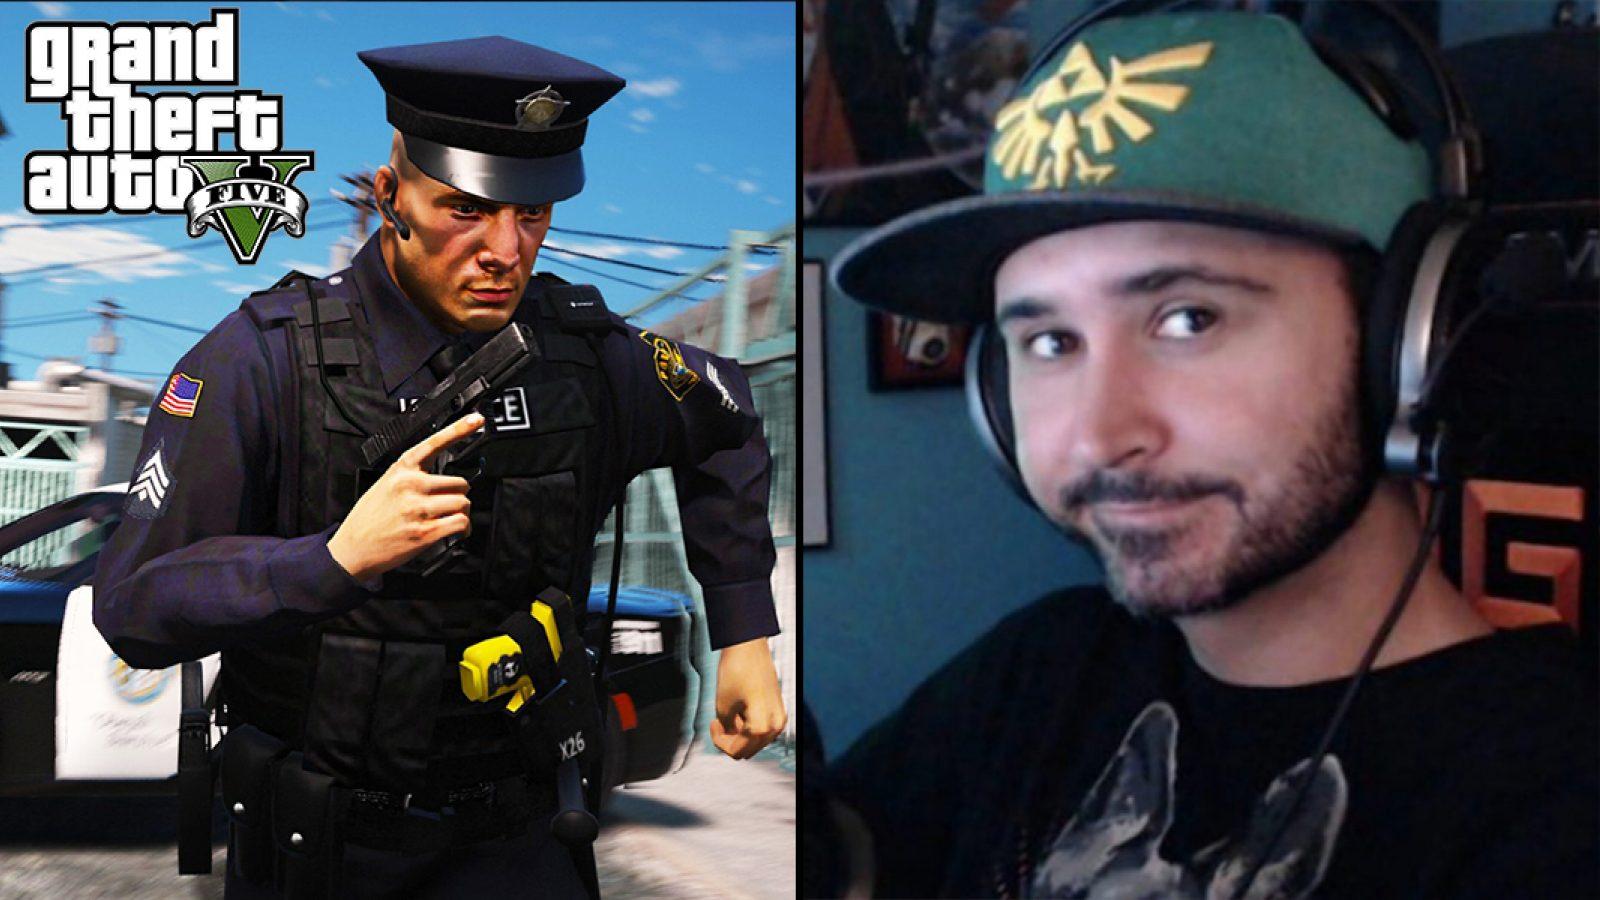 Summit1g pulls off insane move to escape cops in GTA RP after 20-minute  chase - Dexerto